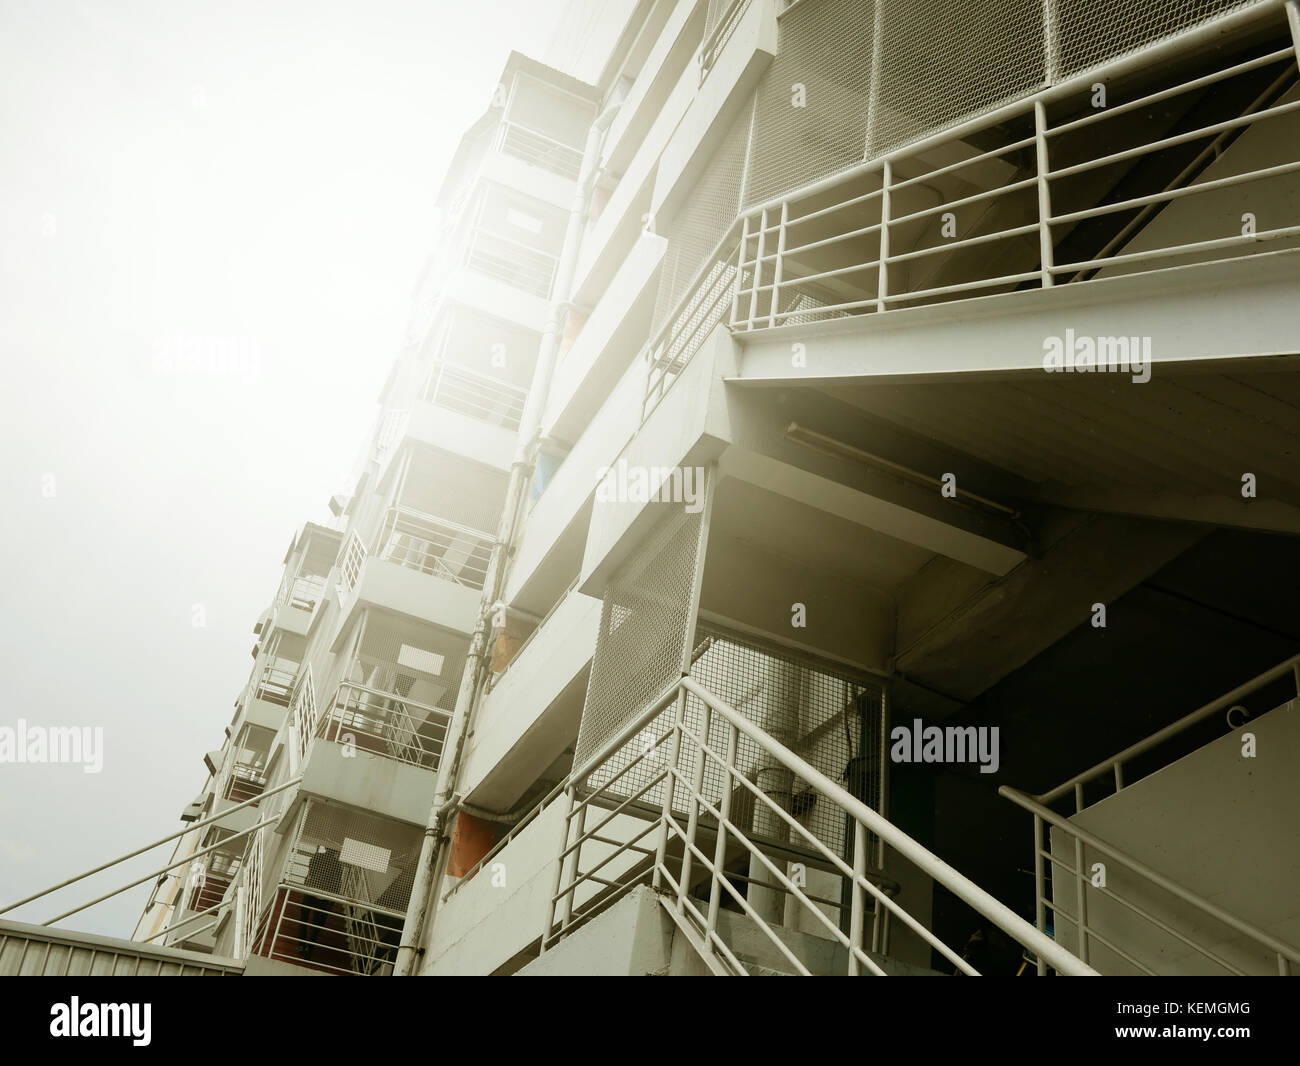 fire escape stairs with sunlight of outside buildings Stock Photo